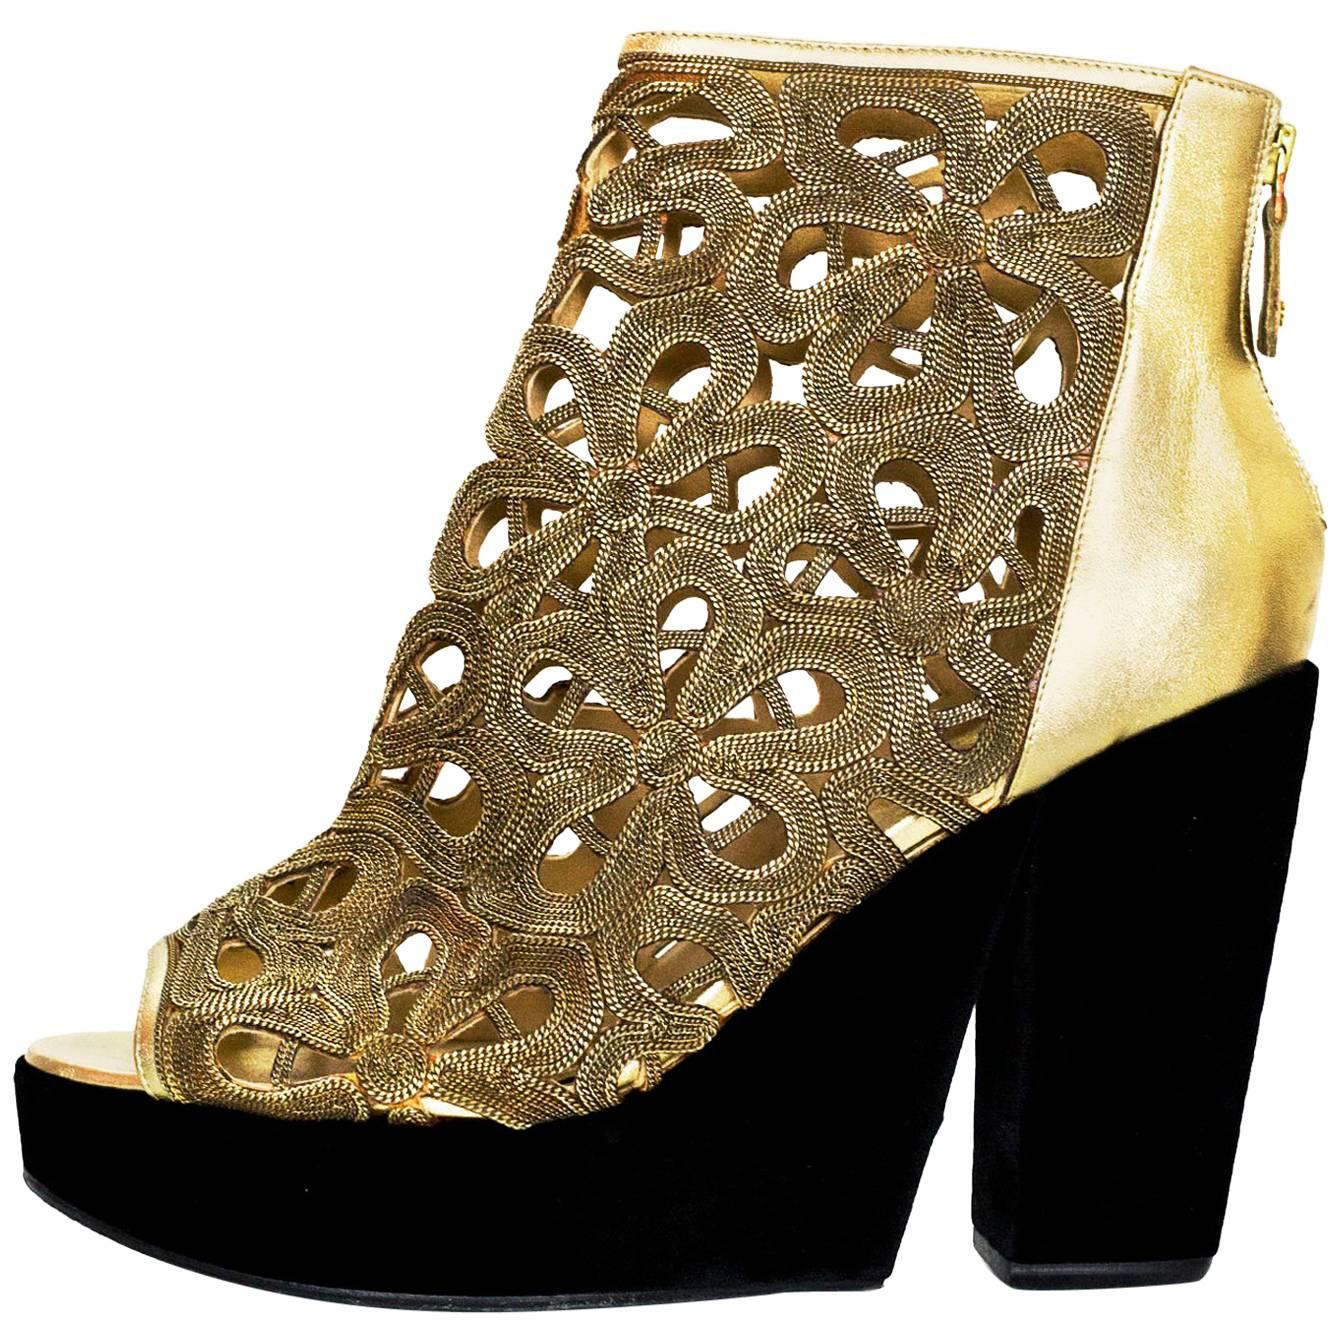 Chanel Gold Handmade Floral Chain Peeptoe Platform Booties
Features black velvet covered heel and platform

Made in: Italy
Year of Production: 2011
Color: Metallic gold and black
Composition: Leather, metal and velvet
Sole Stamp: SAMPLE CC MADE IN